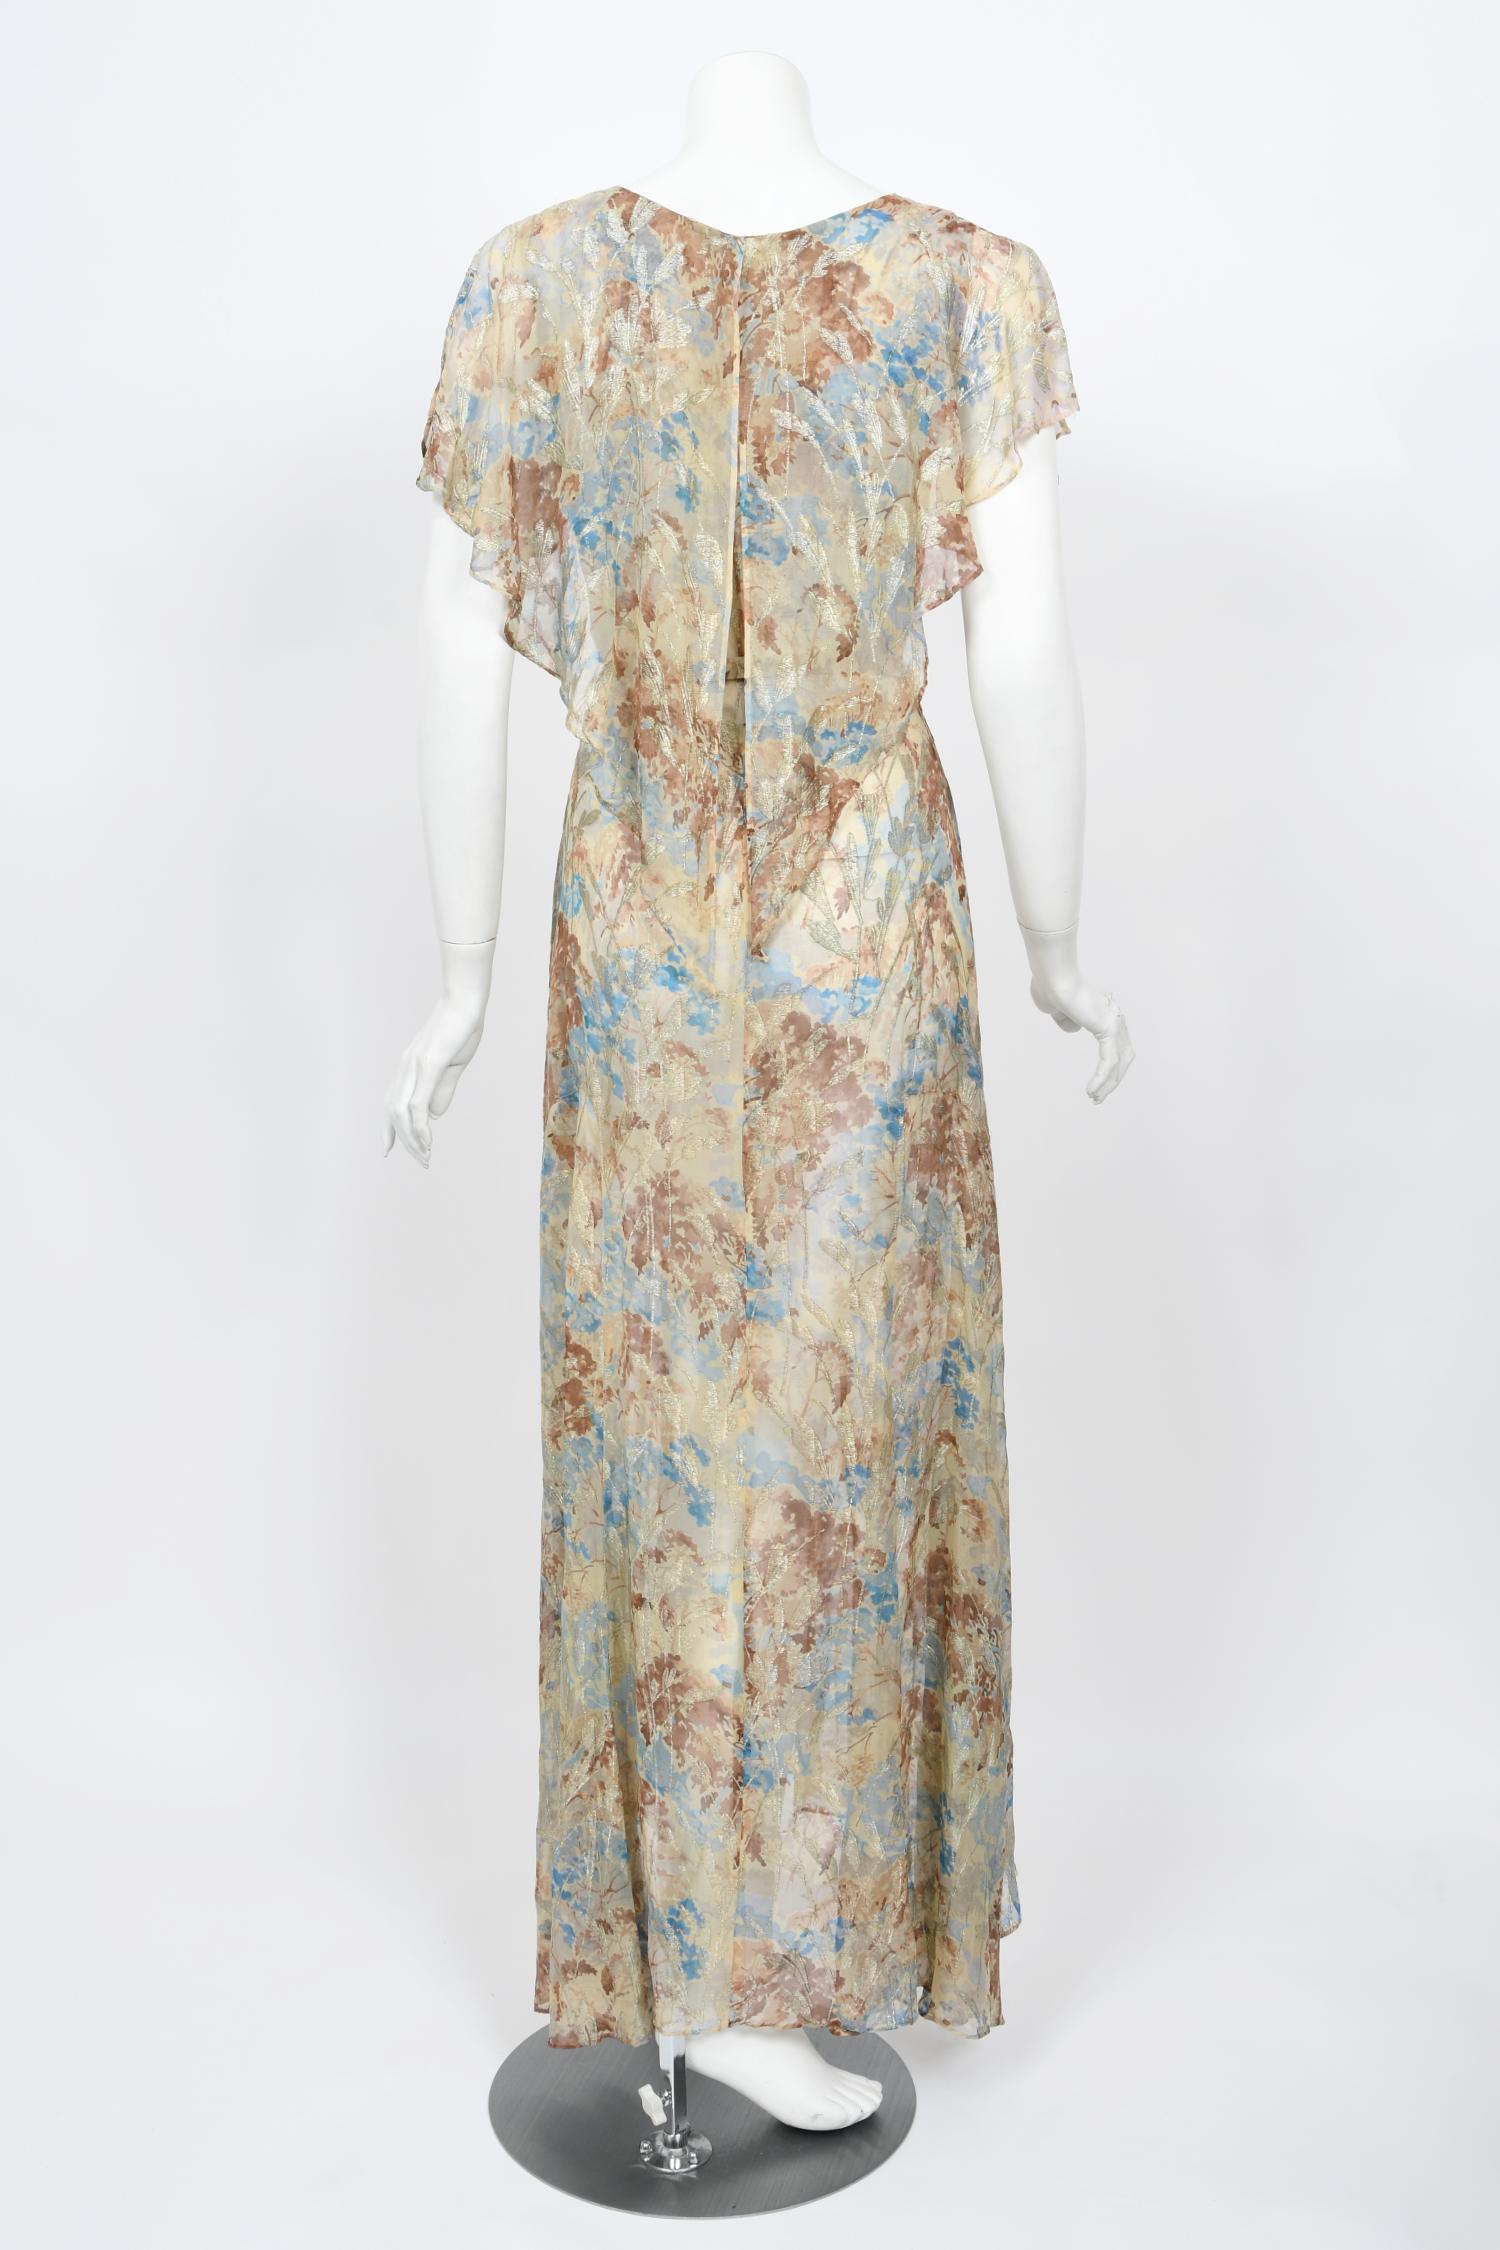 Vintage 1930's Metallic Floral Semi-Sheer Lamé Silk Capelet Drape Belted Gown For Sale 8